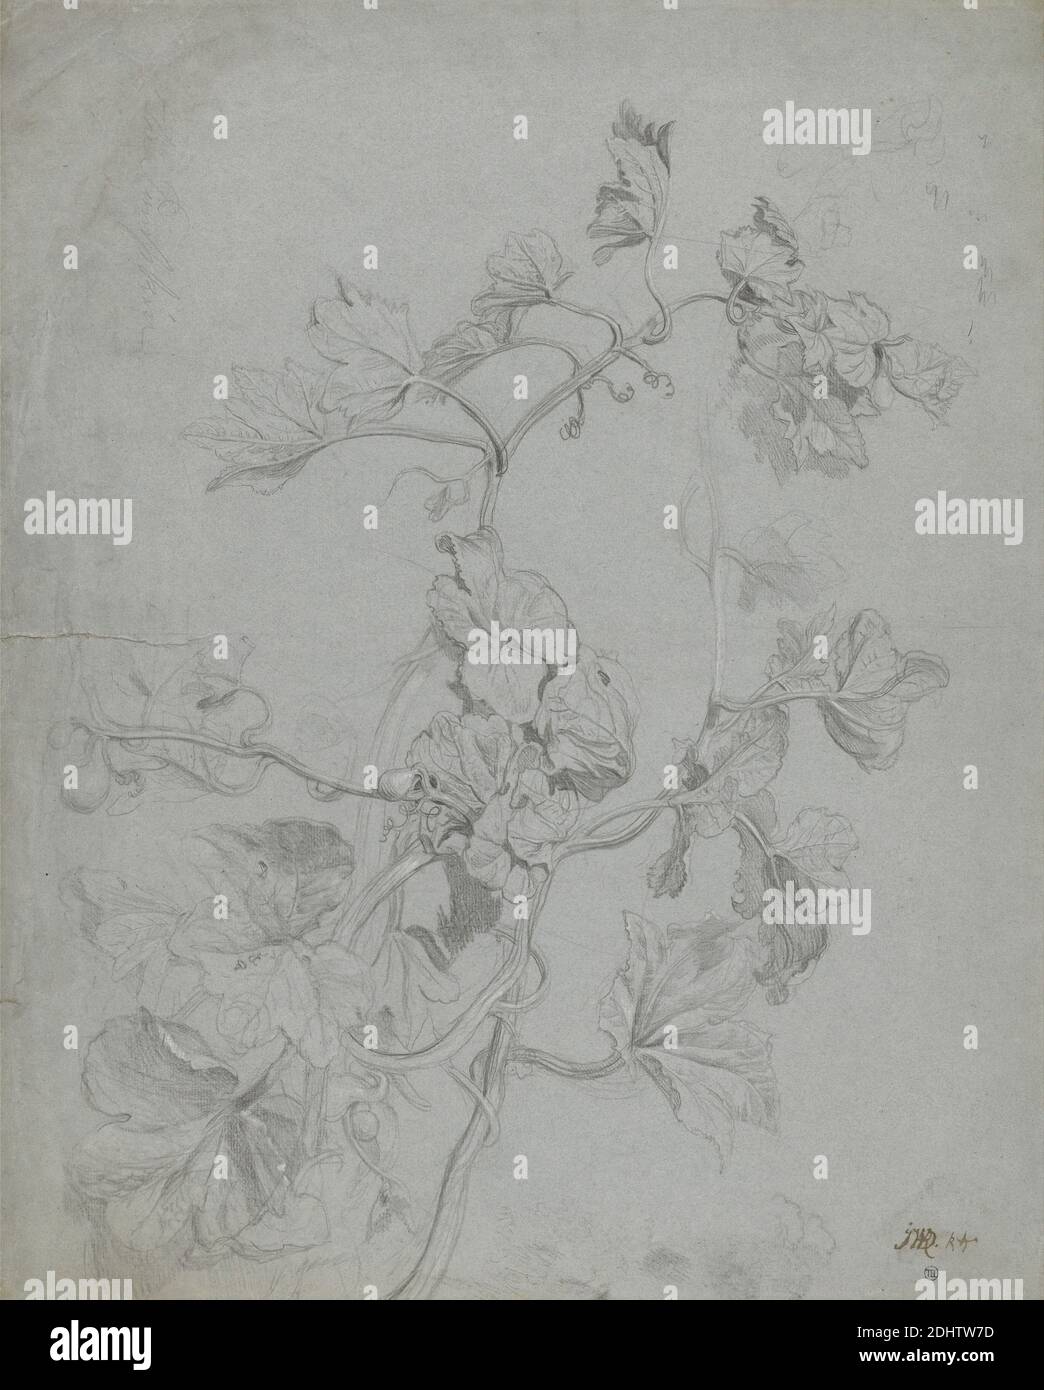 Study of a Climbing Plant (Pumpkin Family), James Ward, 1769–1859, British, undated, Graphite and white chalk on medium, moderately textured, blue laid paper, Sheet: 21 1/2 x 17 1/4 inches (54.6 x 43.8 cm), botanical, botanical subject, nature study, plants, science, still life Stock Photo